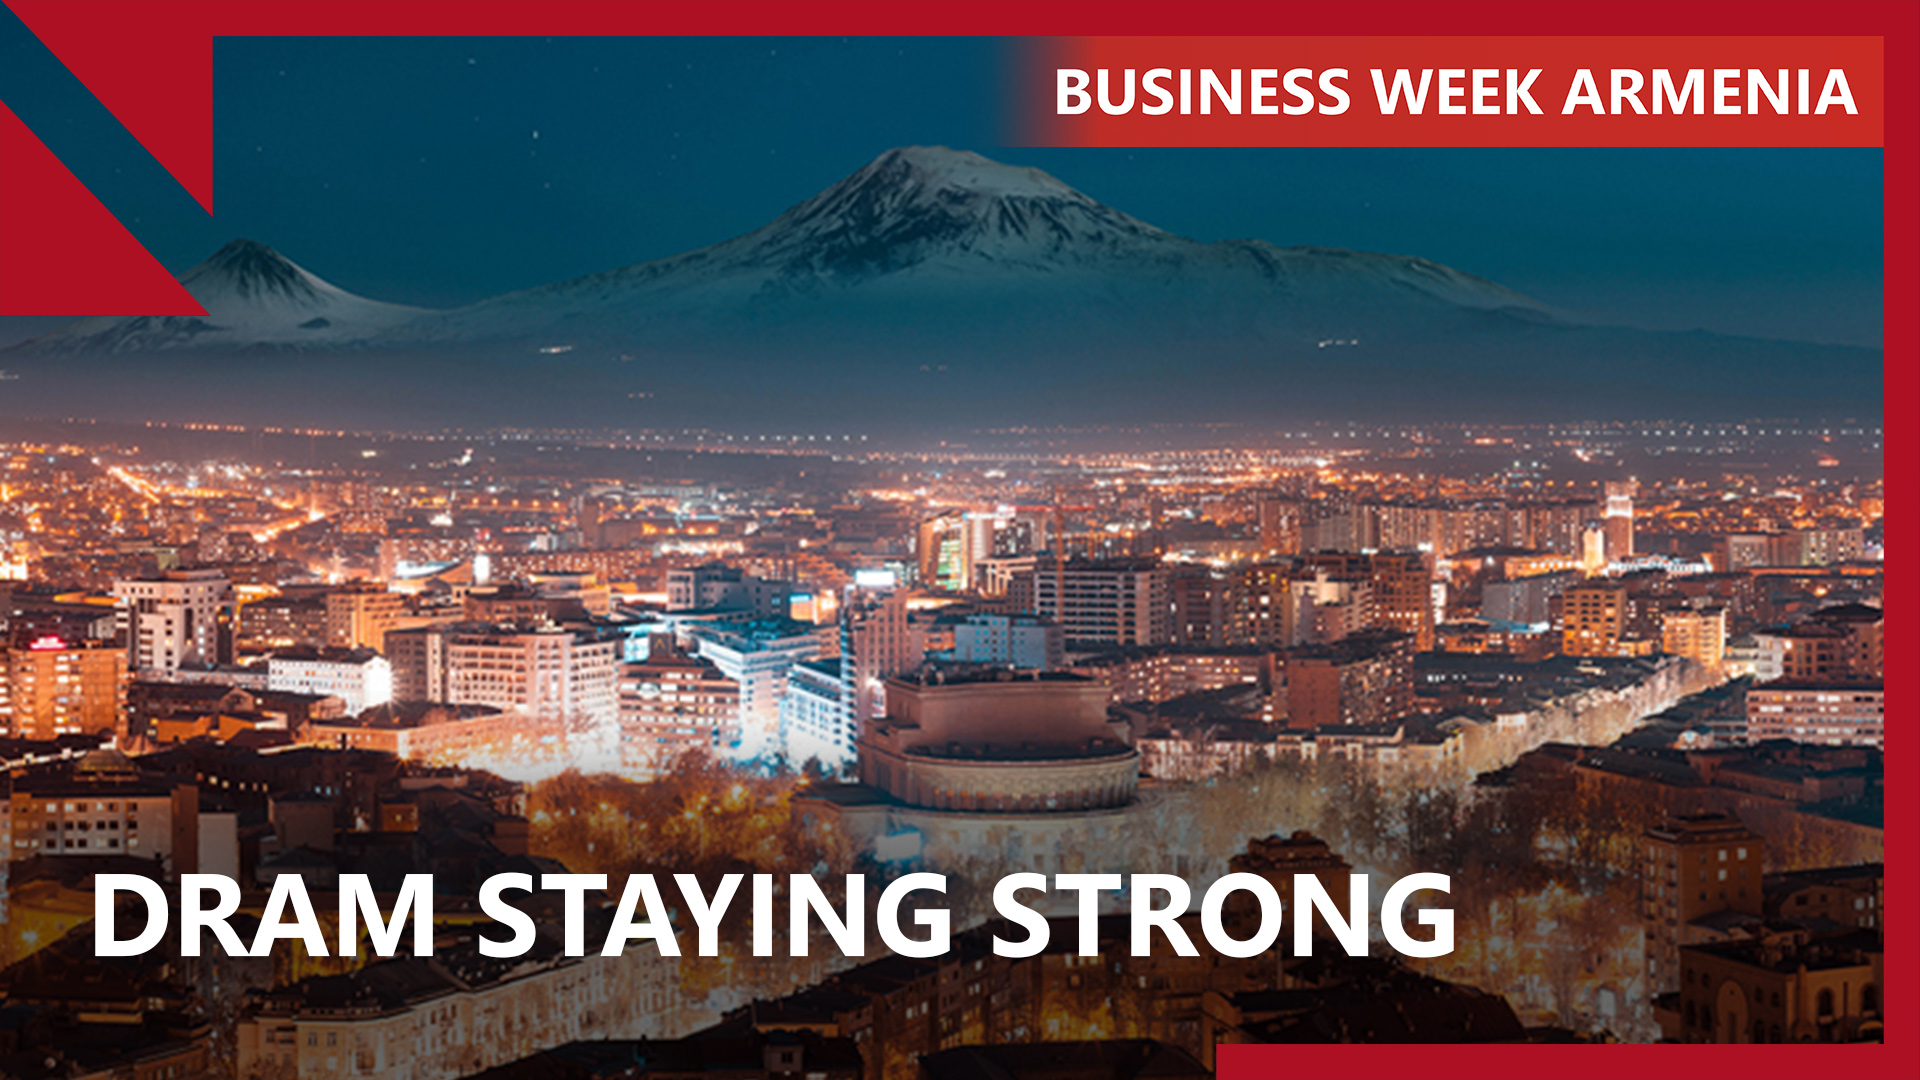 Armenia’s currency to remain ‘overvalued’ this year: THIS WEEK IN BUSINESS